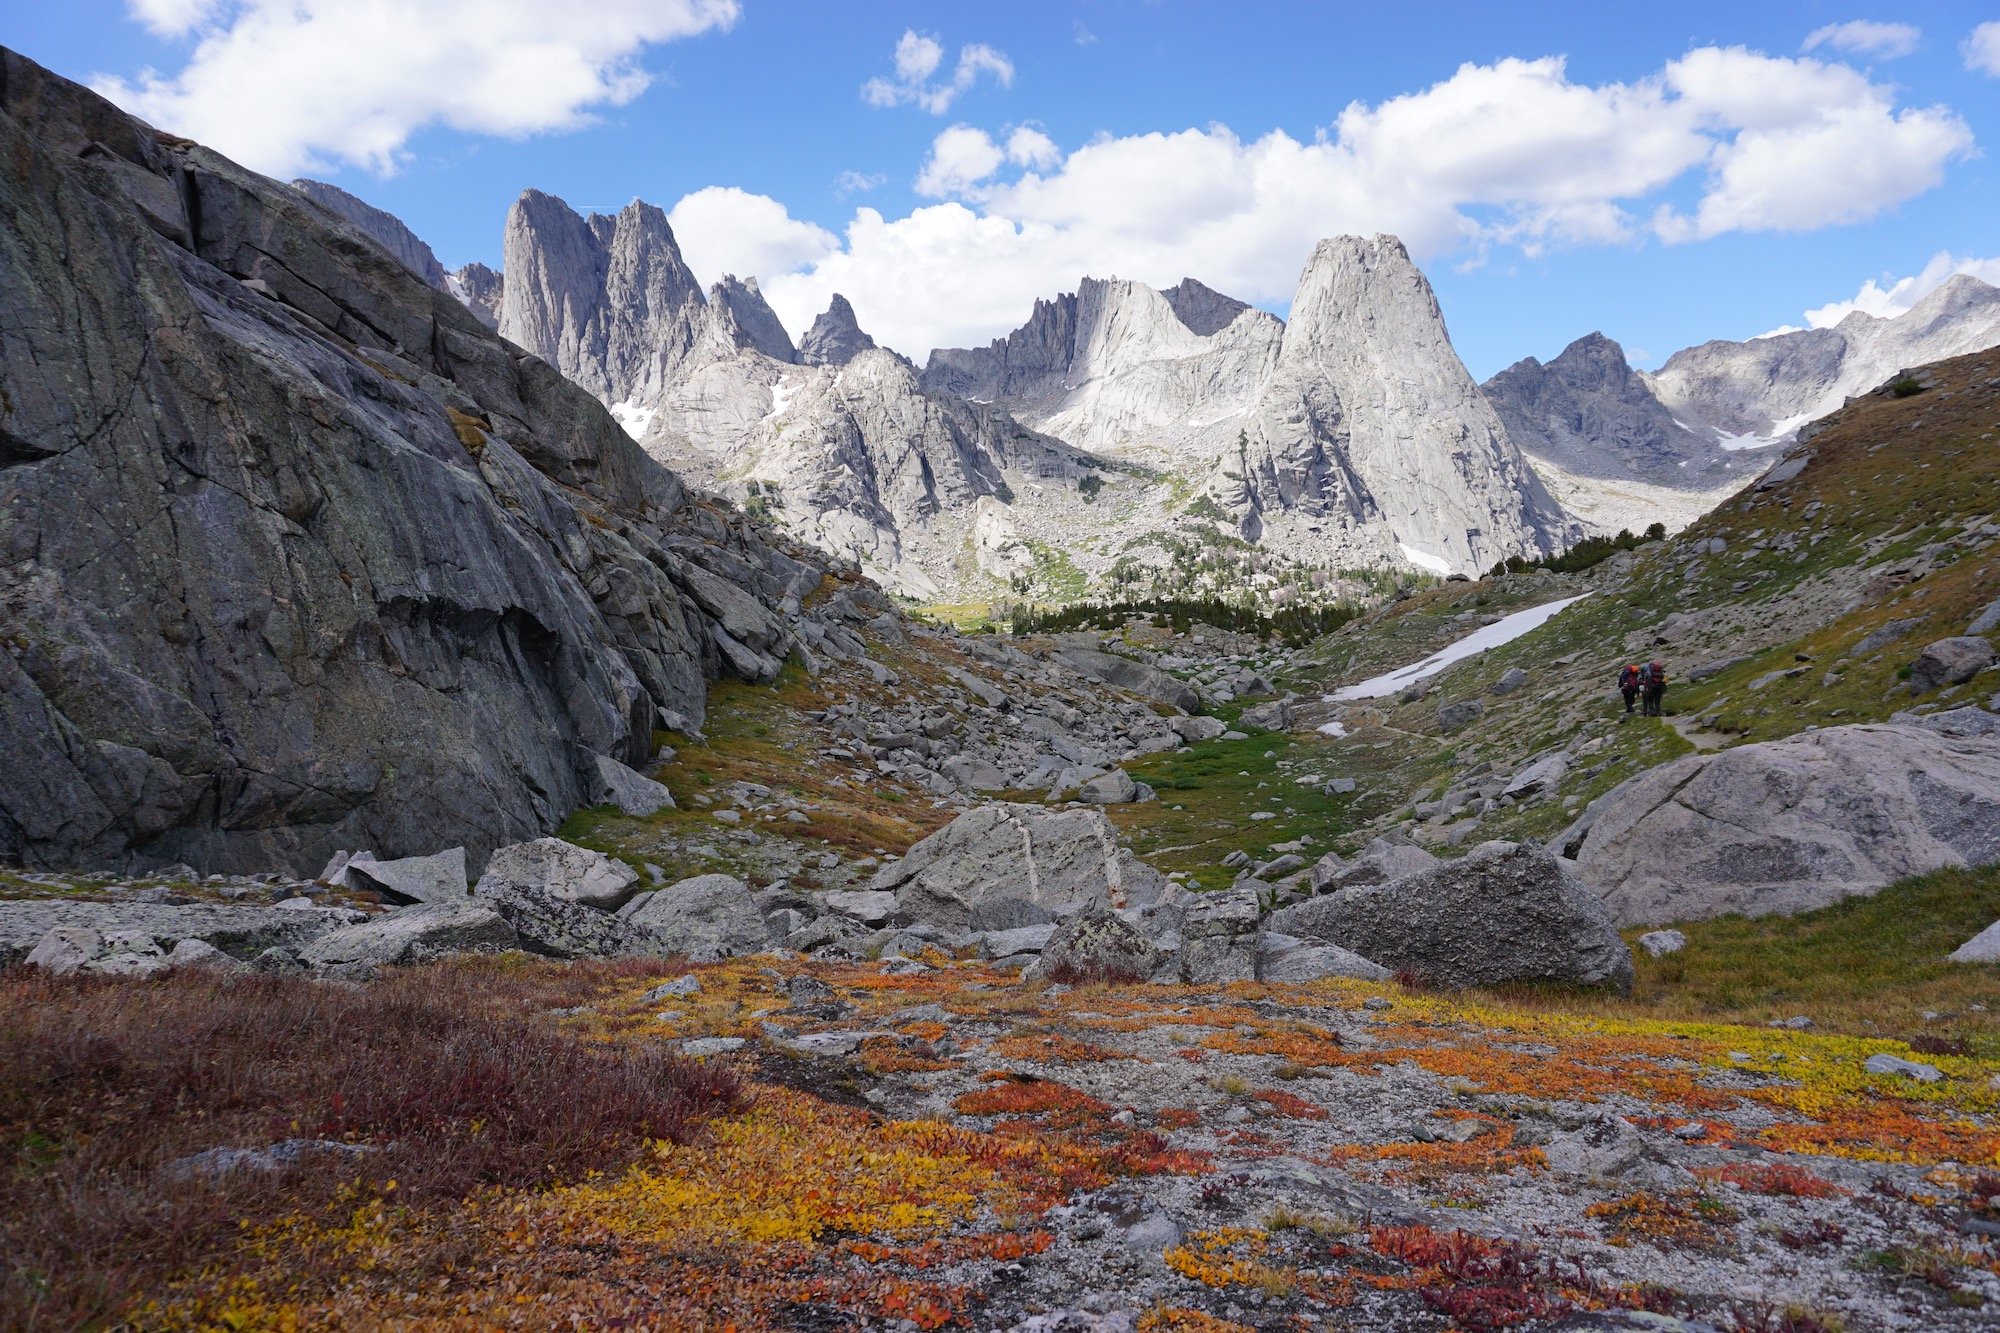 Rocky peaks in the Cirque of the Towers in Wyoming's Wind River Range